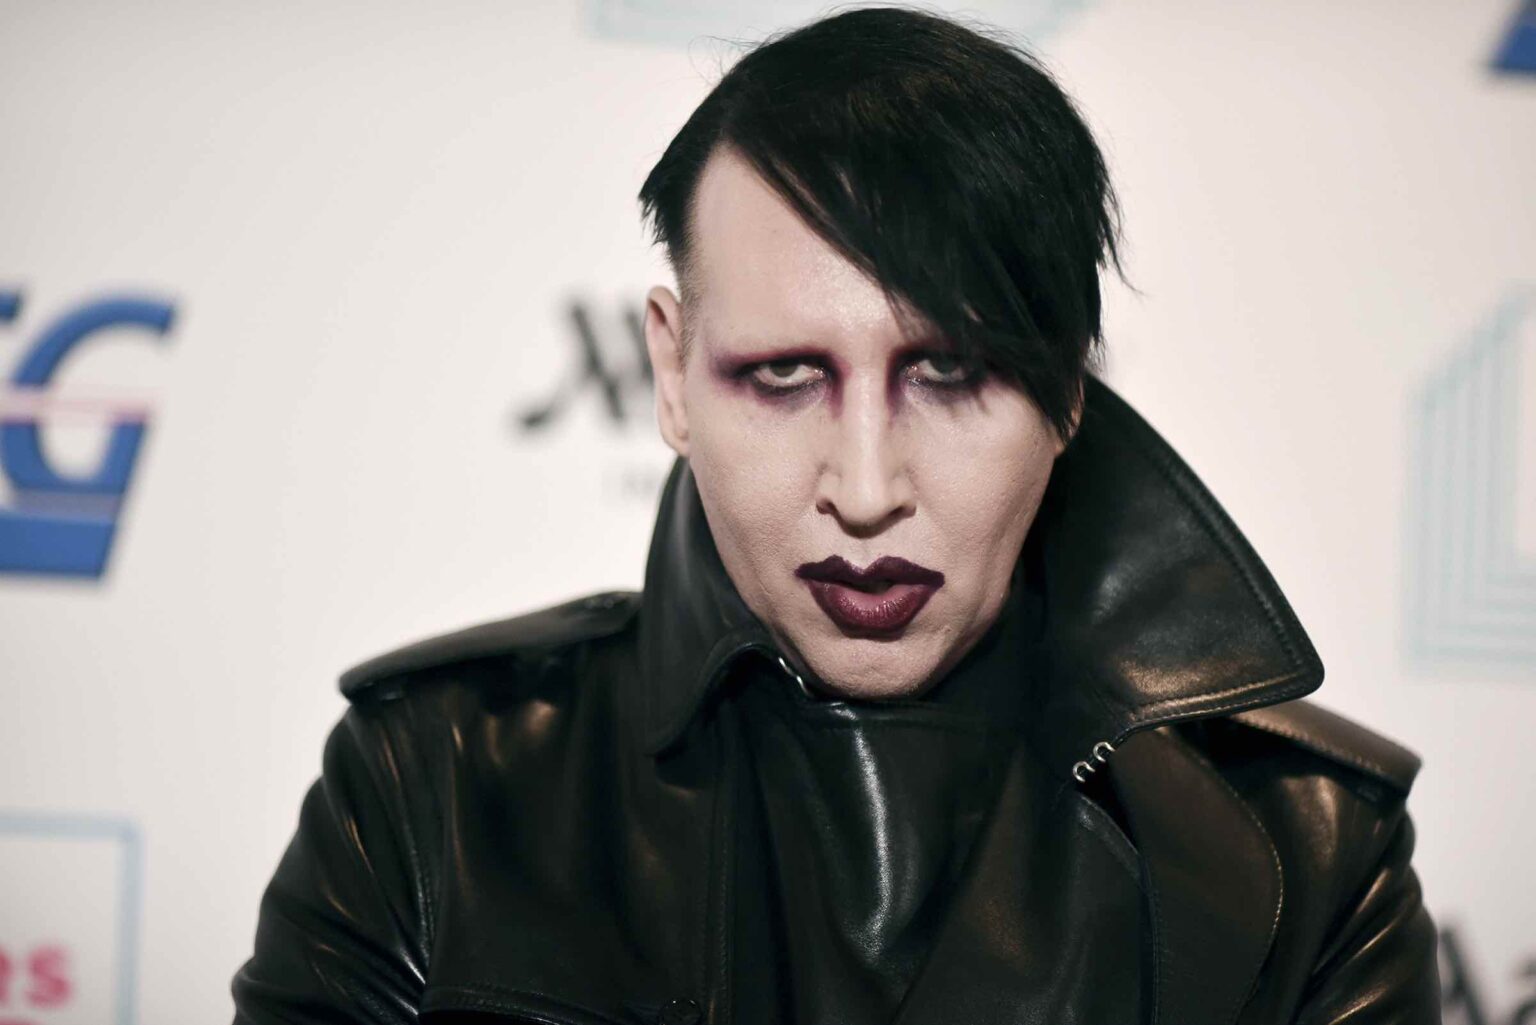 After allegations of sexual abuse, companies are distancing themselves from singer Marilyn Manson. See which ones with our guide.